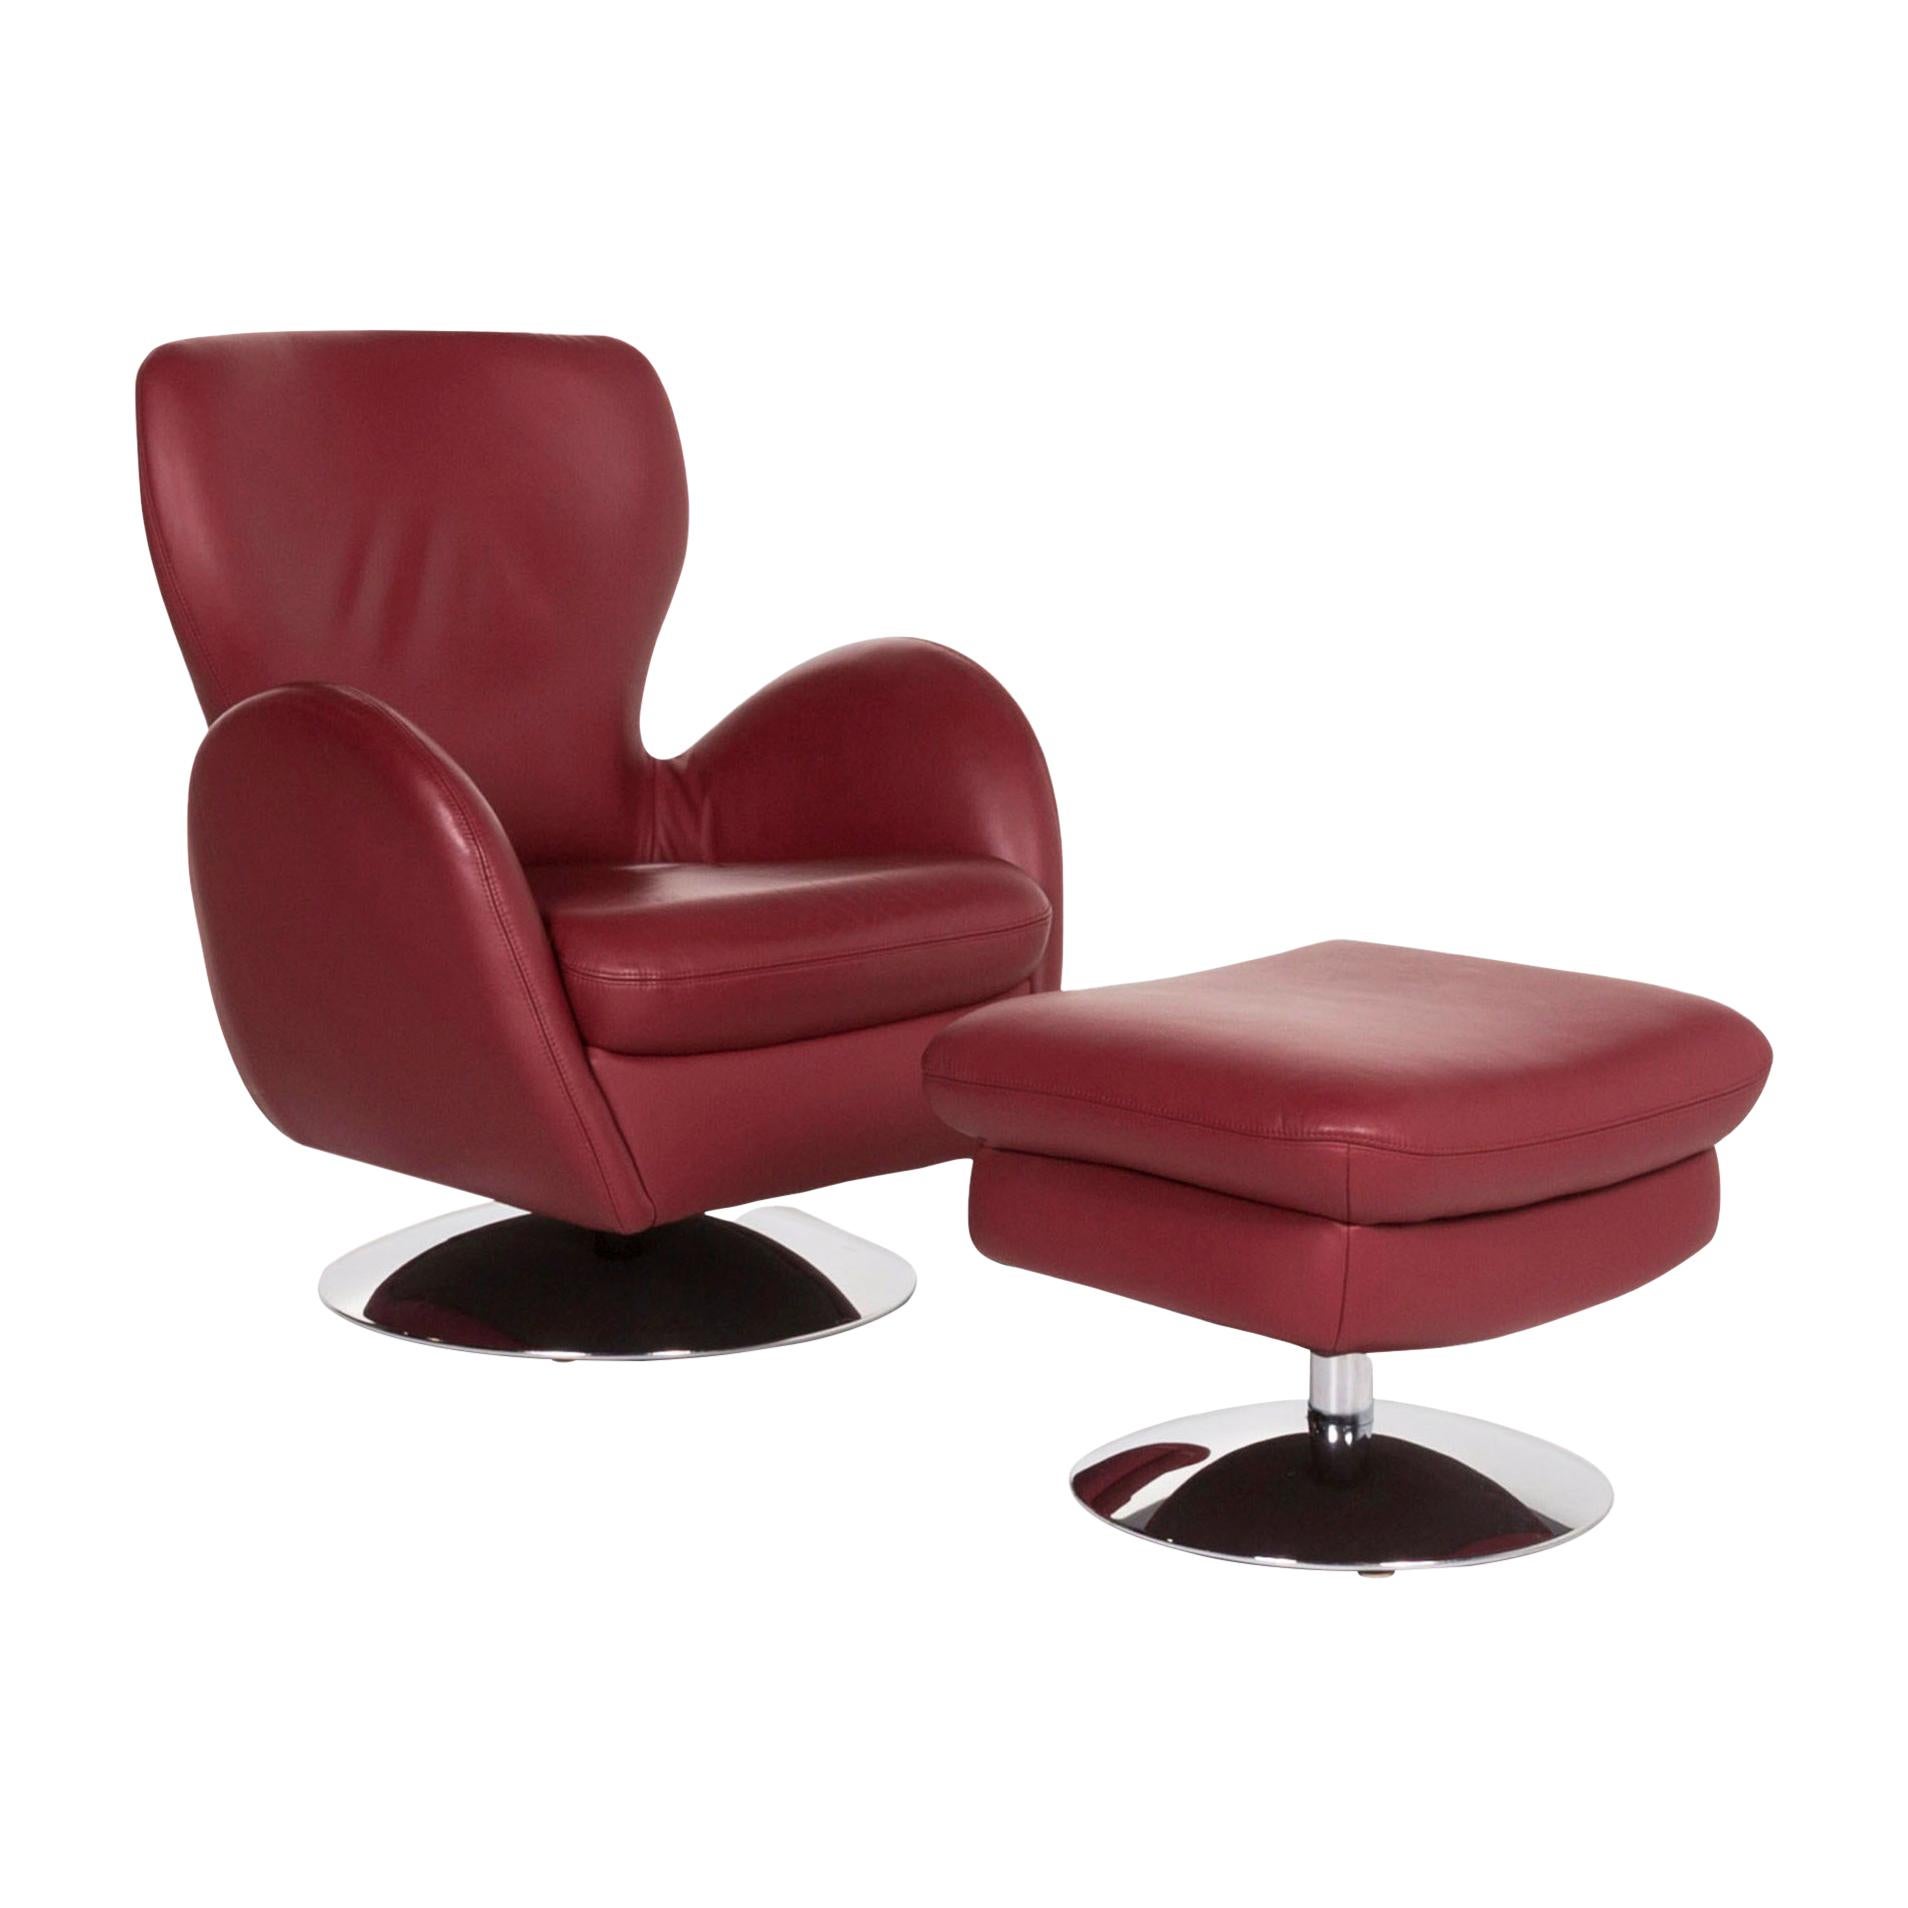 Koinor Leather Armchair Set Red 1 Armchair 1 Stool